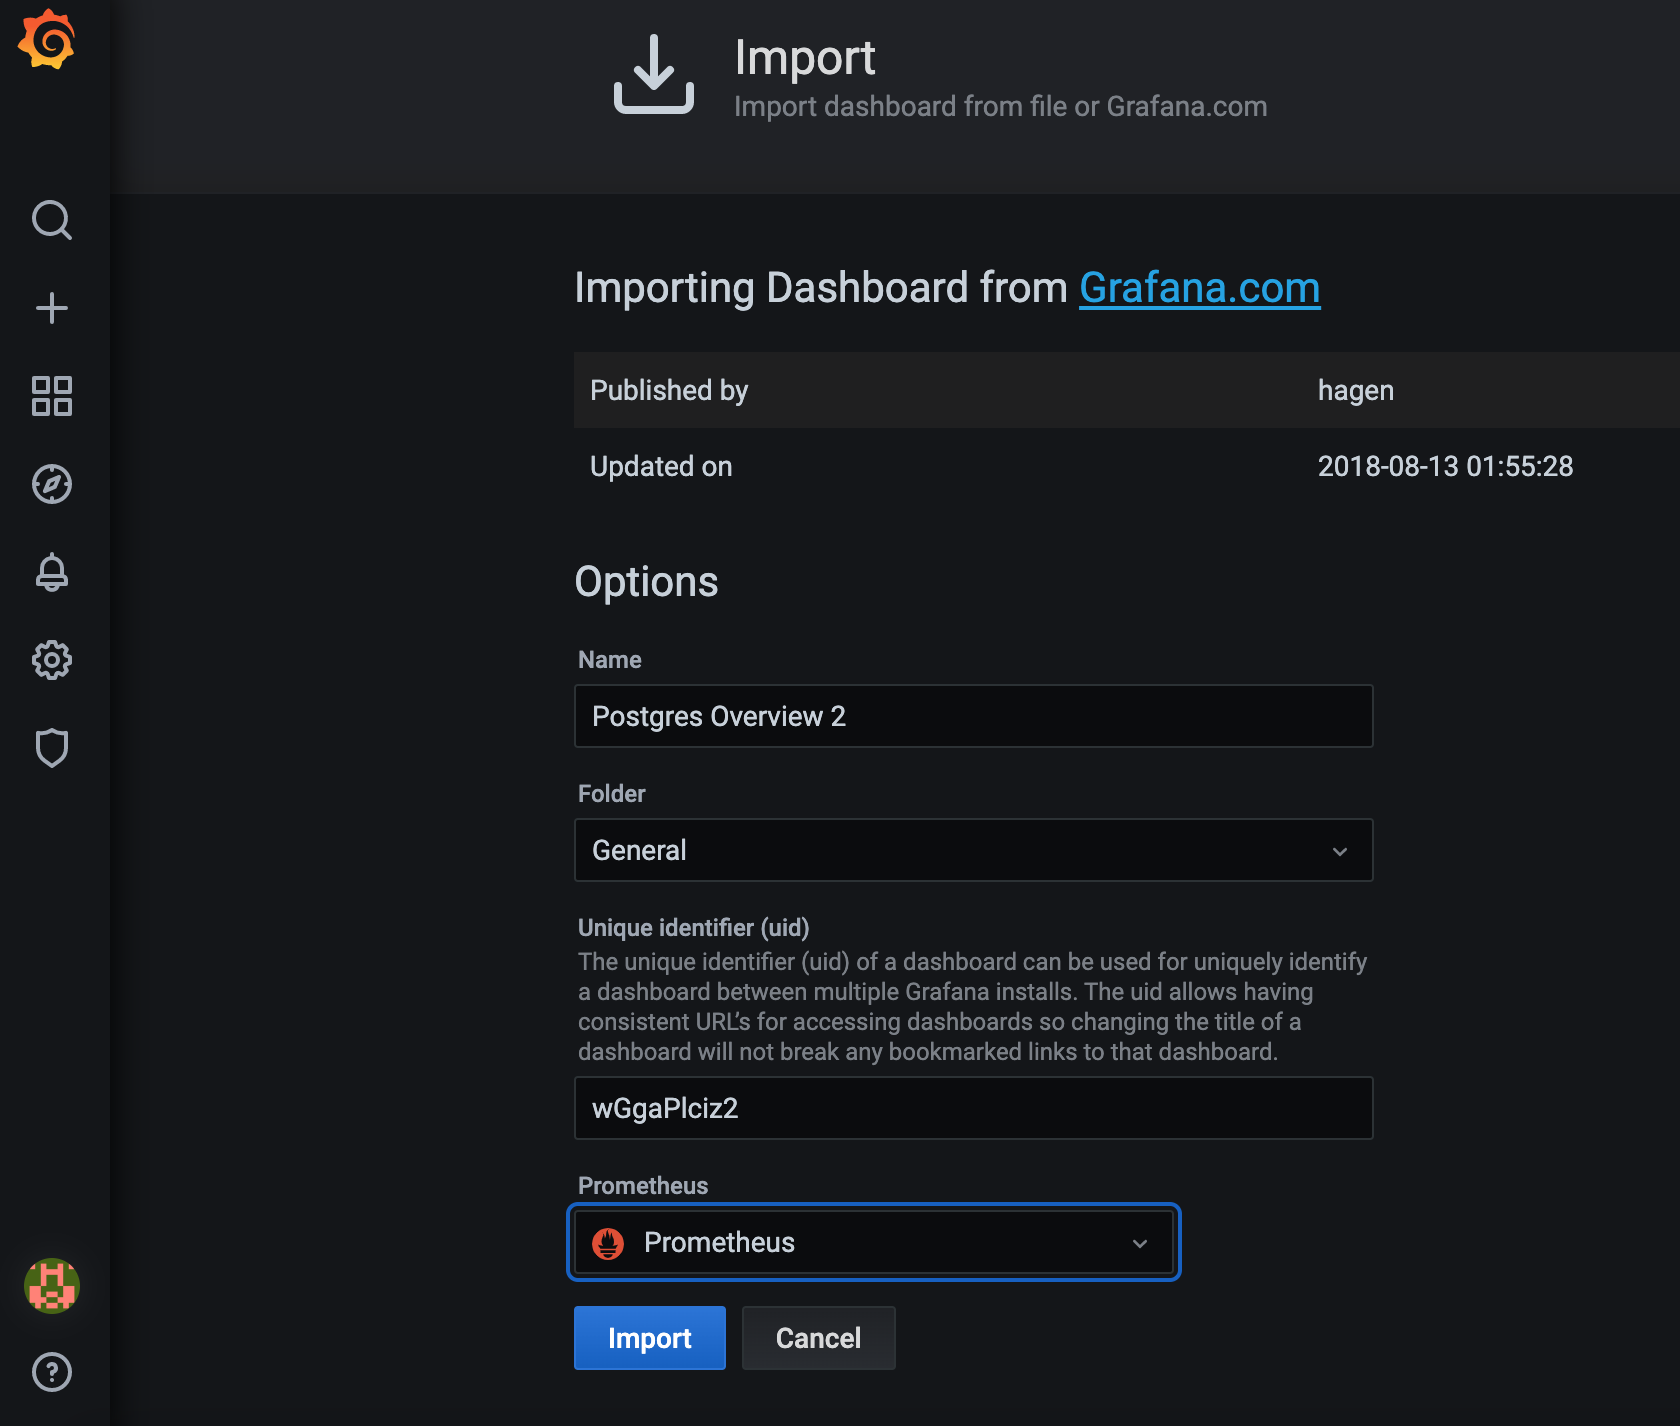 Importing a dashboard.